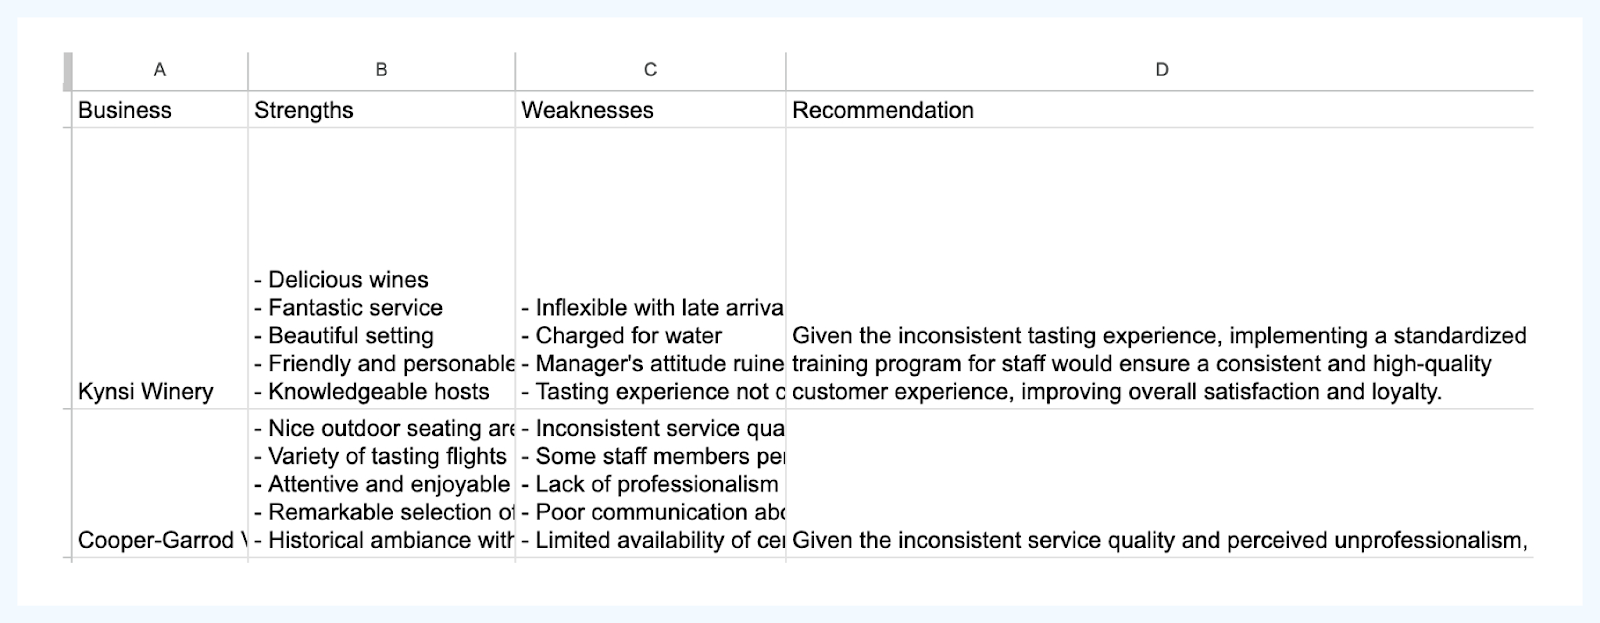 a table with user reviews transformed into business recommendations